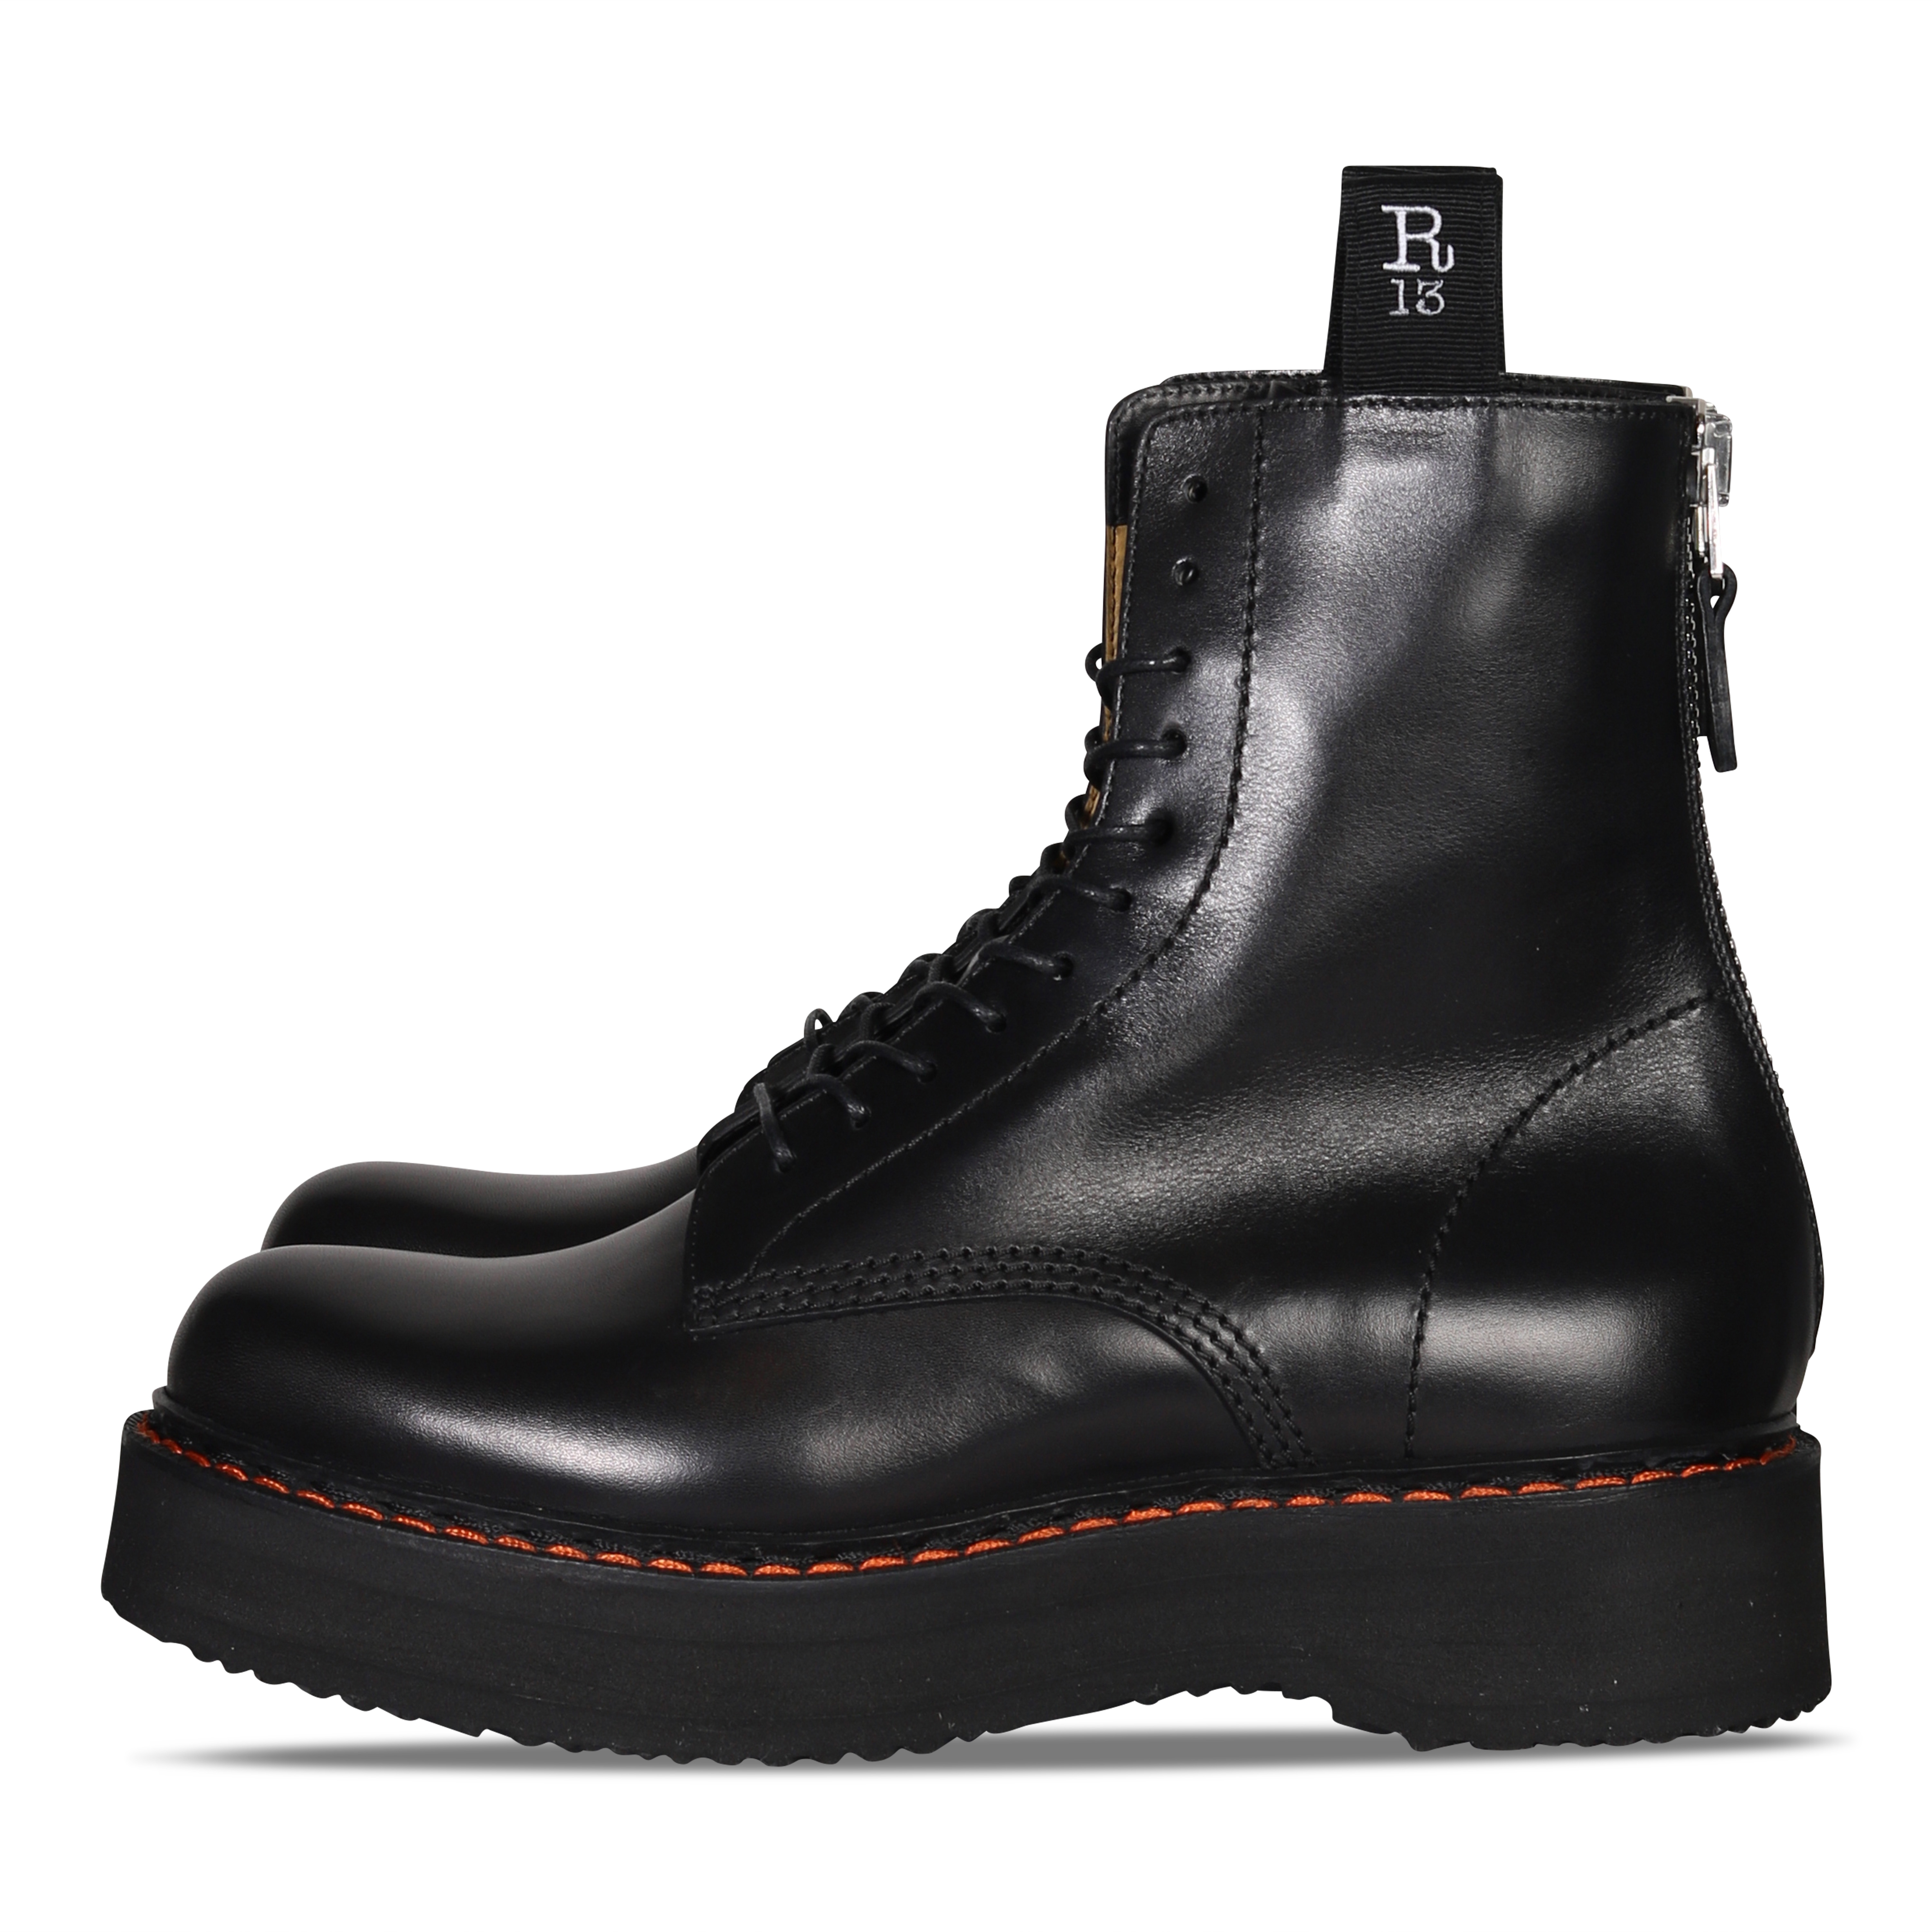 R13 Stack Boots in Black